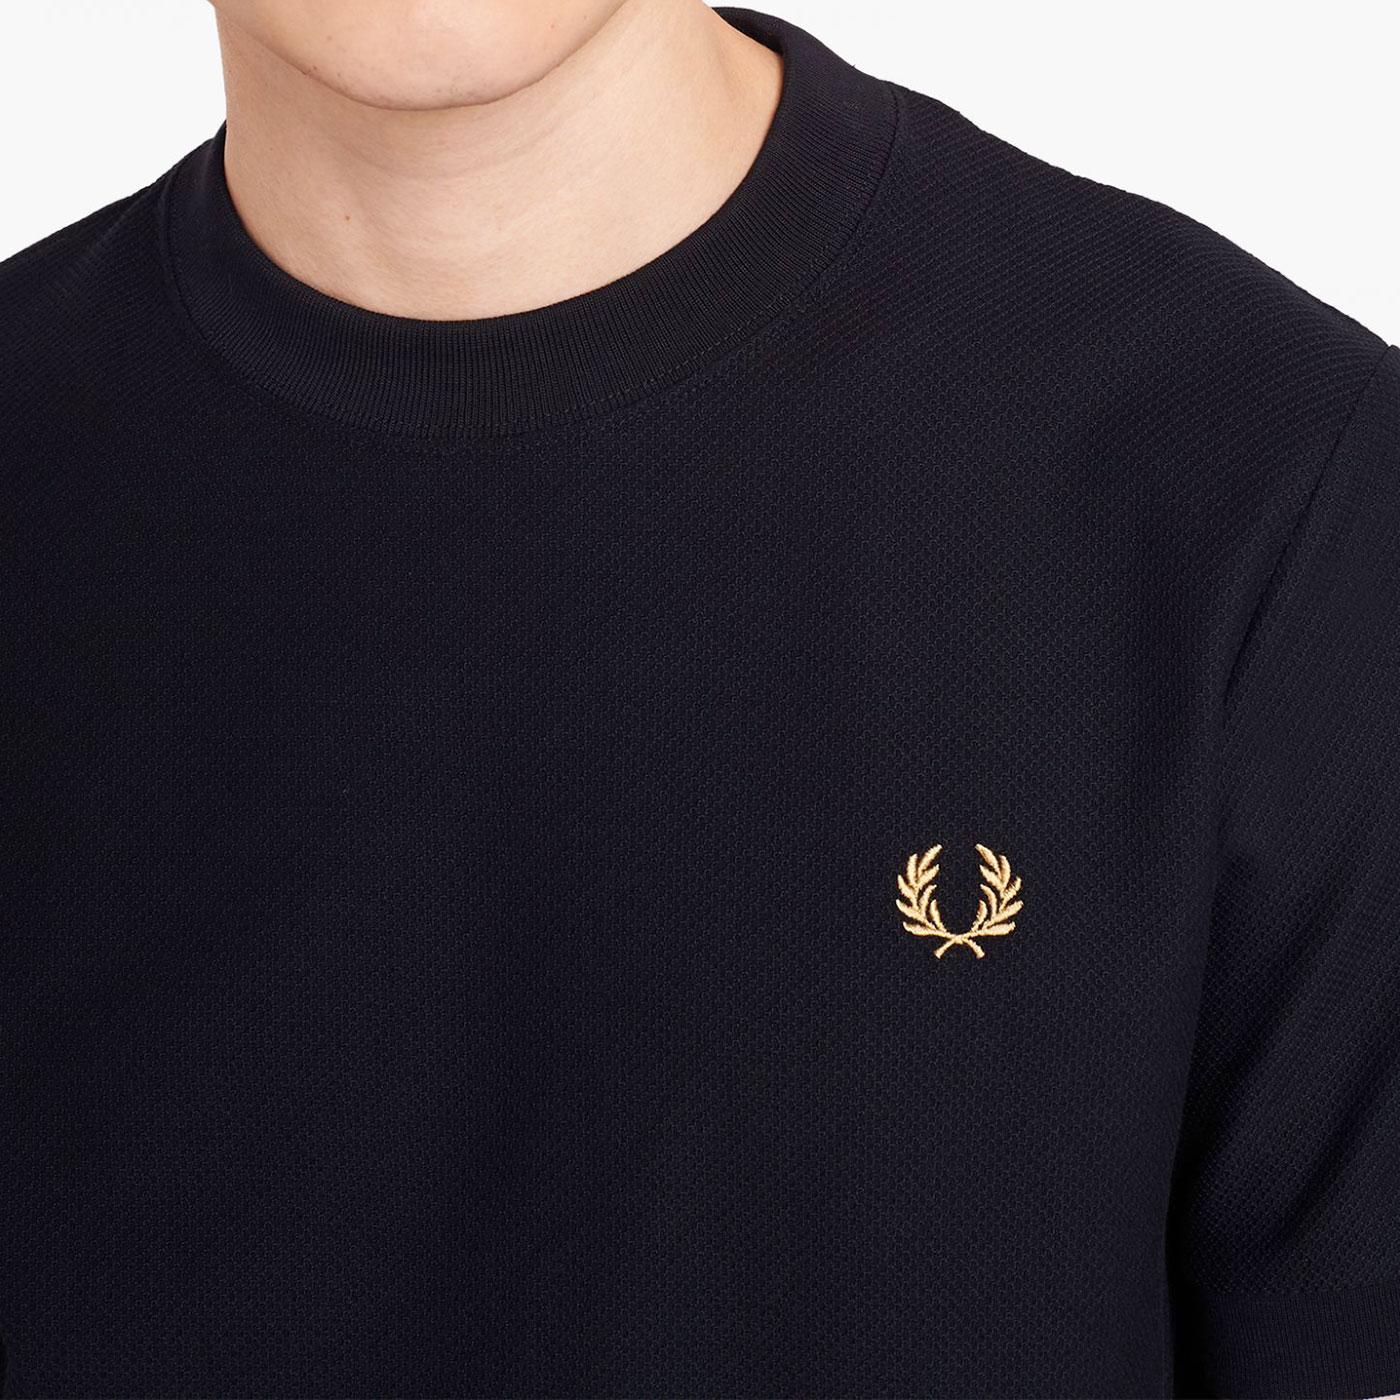 FRED PERRY Crew Neck Pique Texture T-Shirt in Black